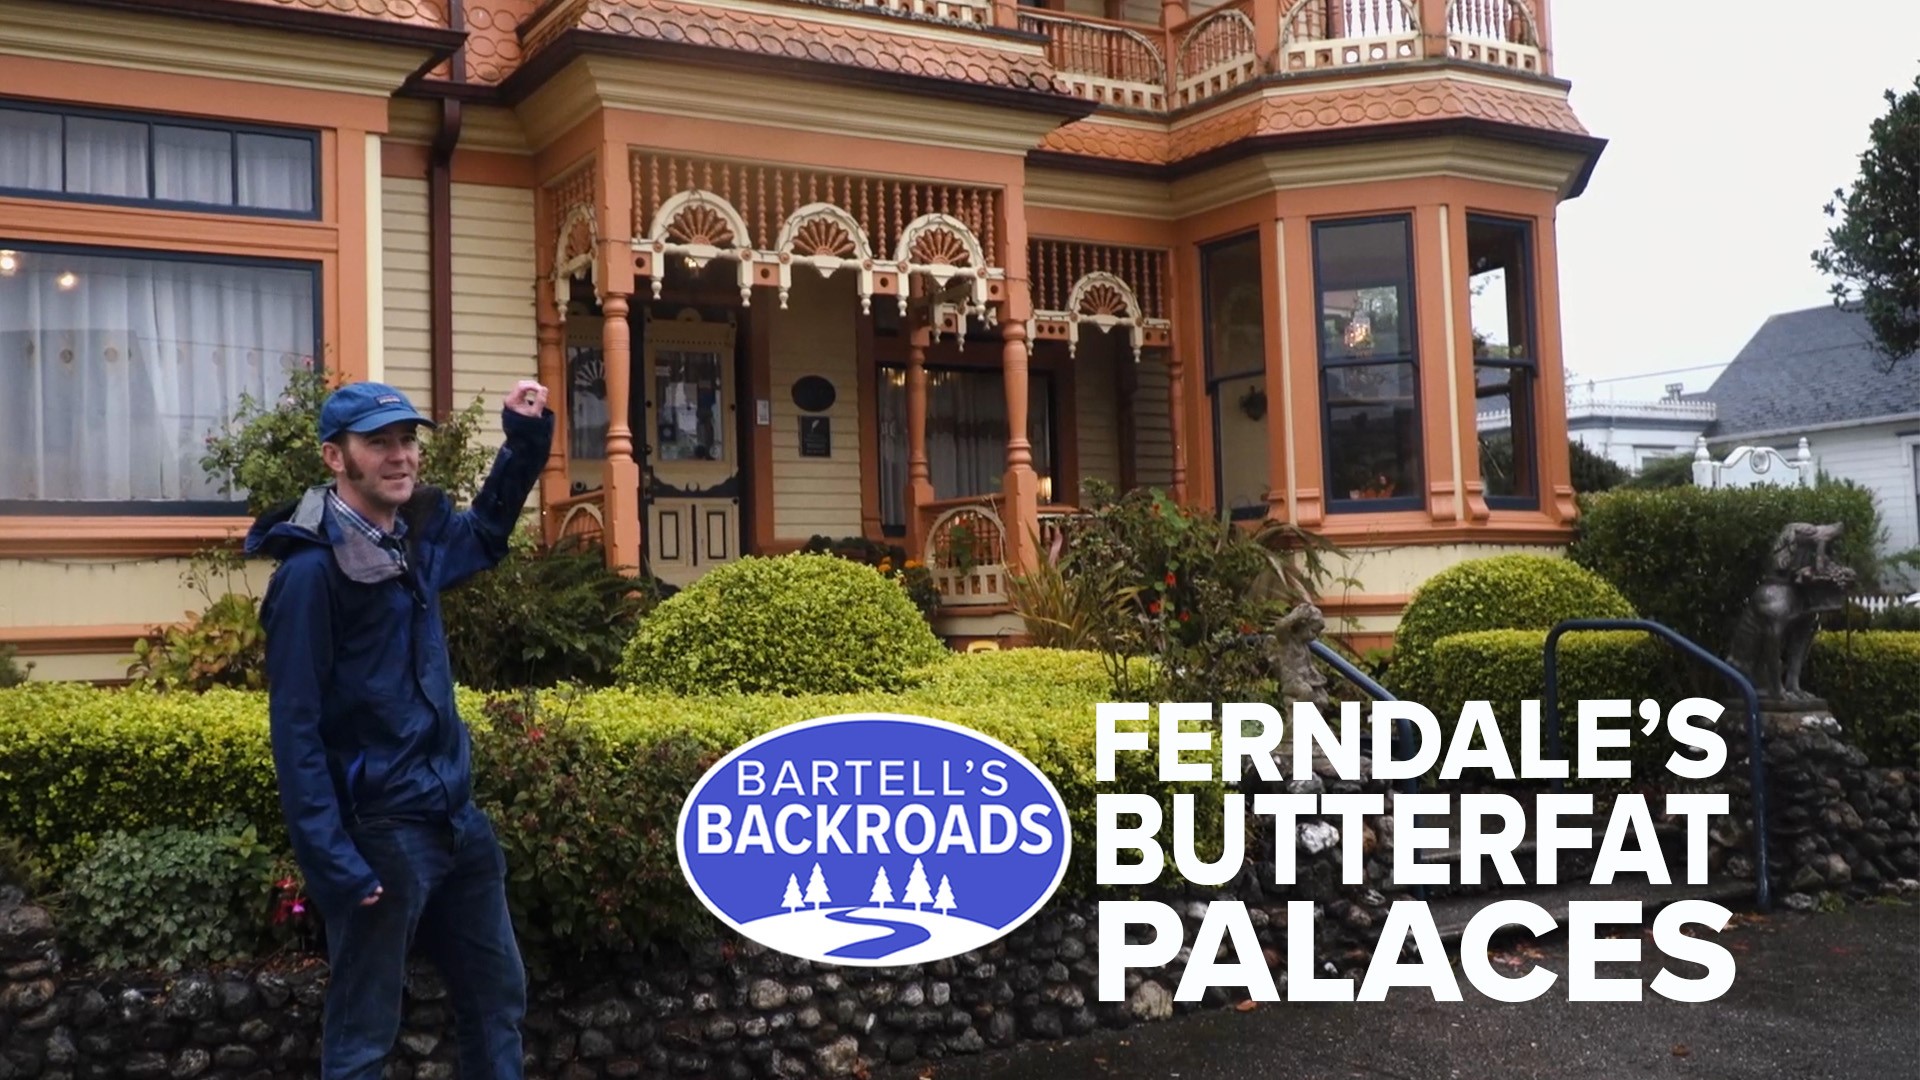 In Ferndale, a butterfat palace is a Victorian-style home or business laced with an exorbitant amount of what’s called "gingerbread."